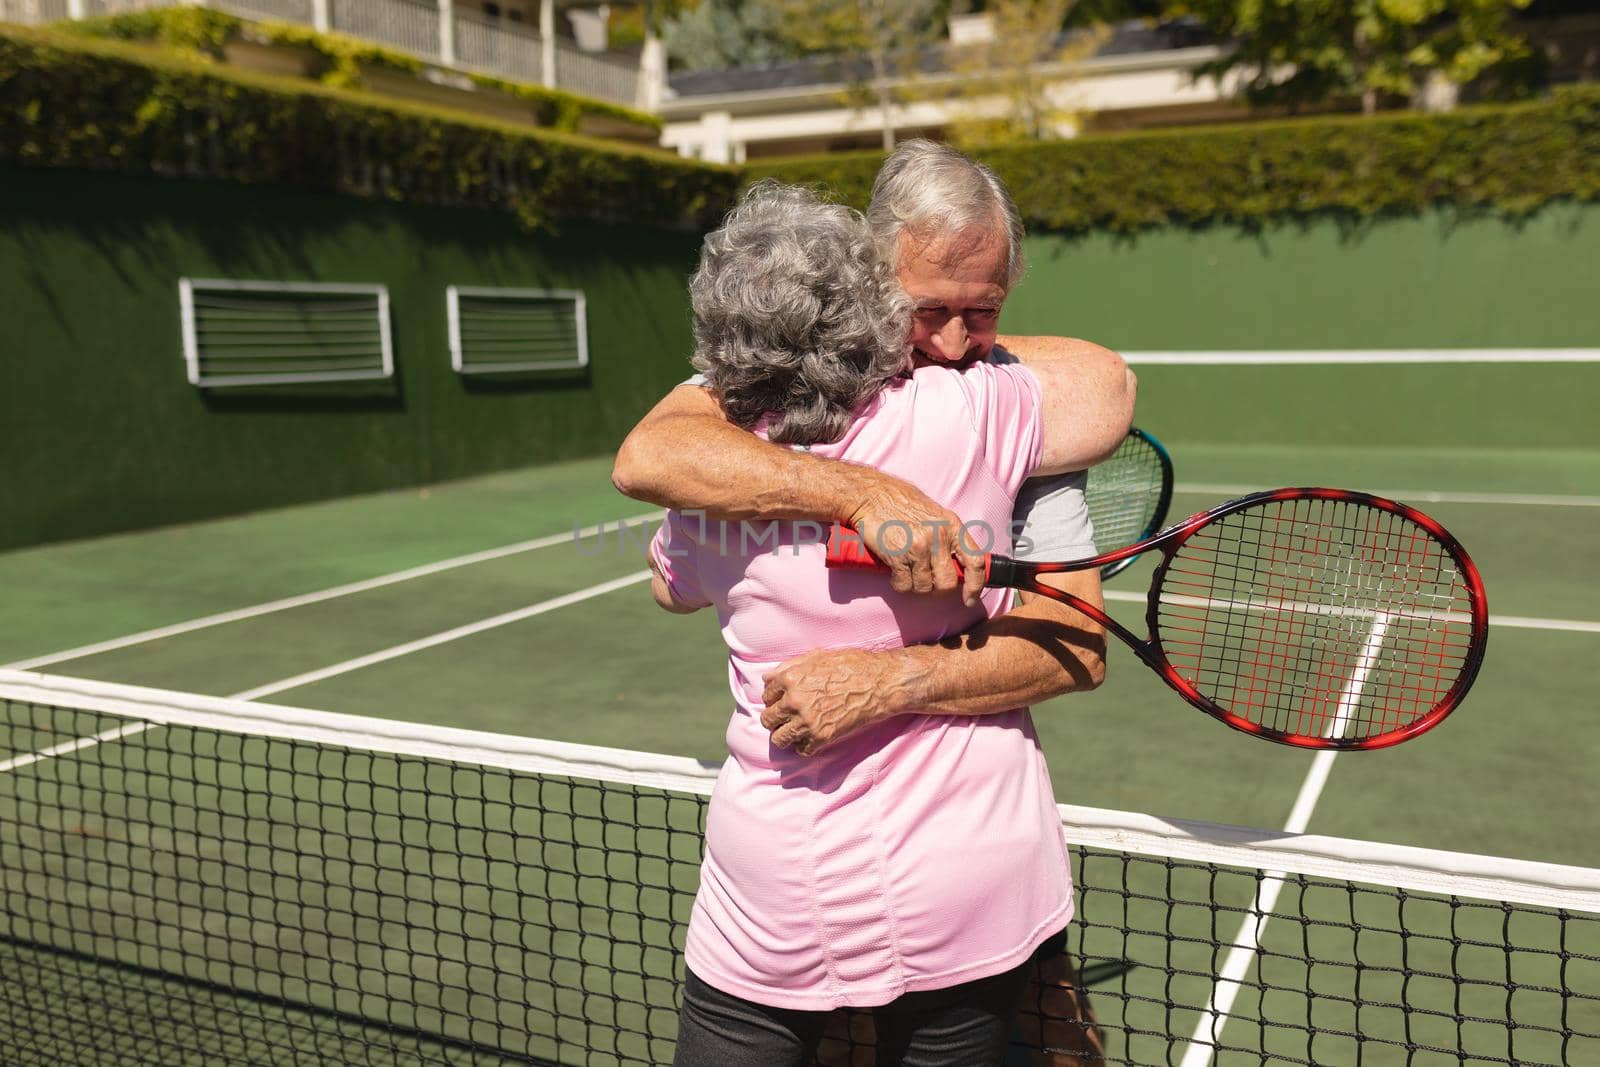 Senior caucasian couple playing tennis together on court embracing. retirement retreat and active senior lifestyle concept.